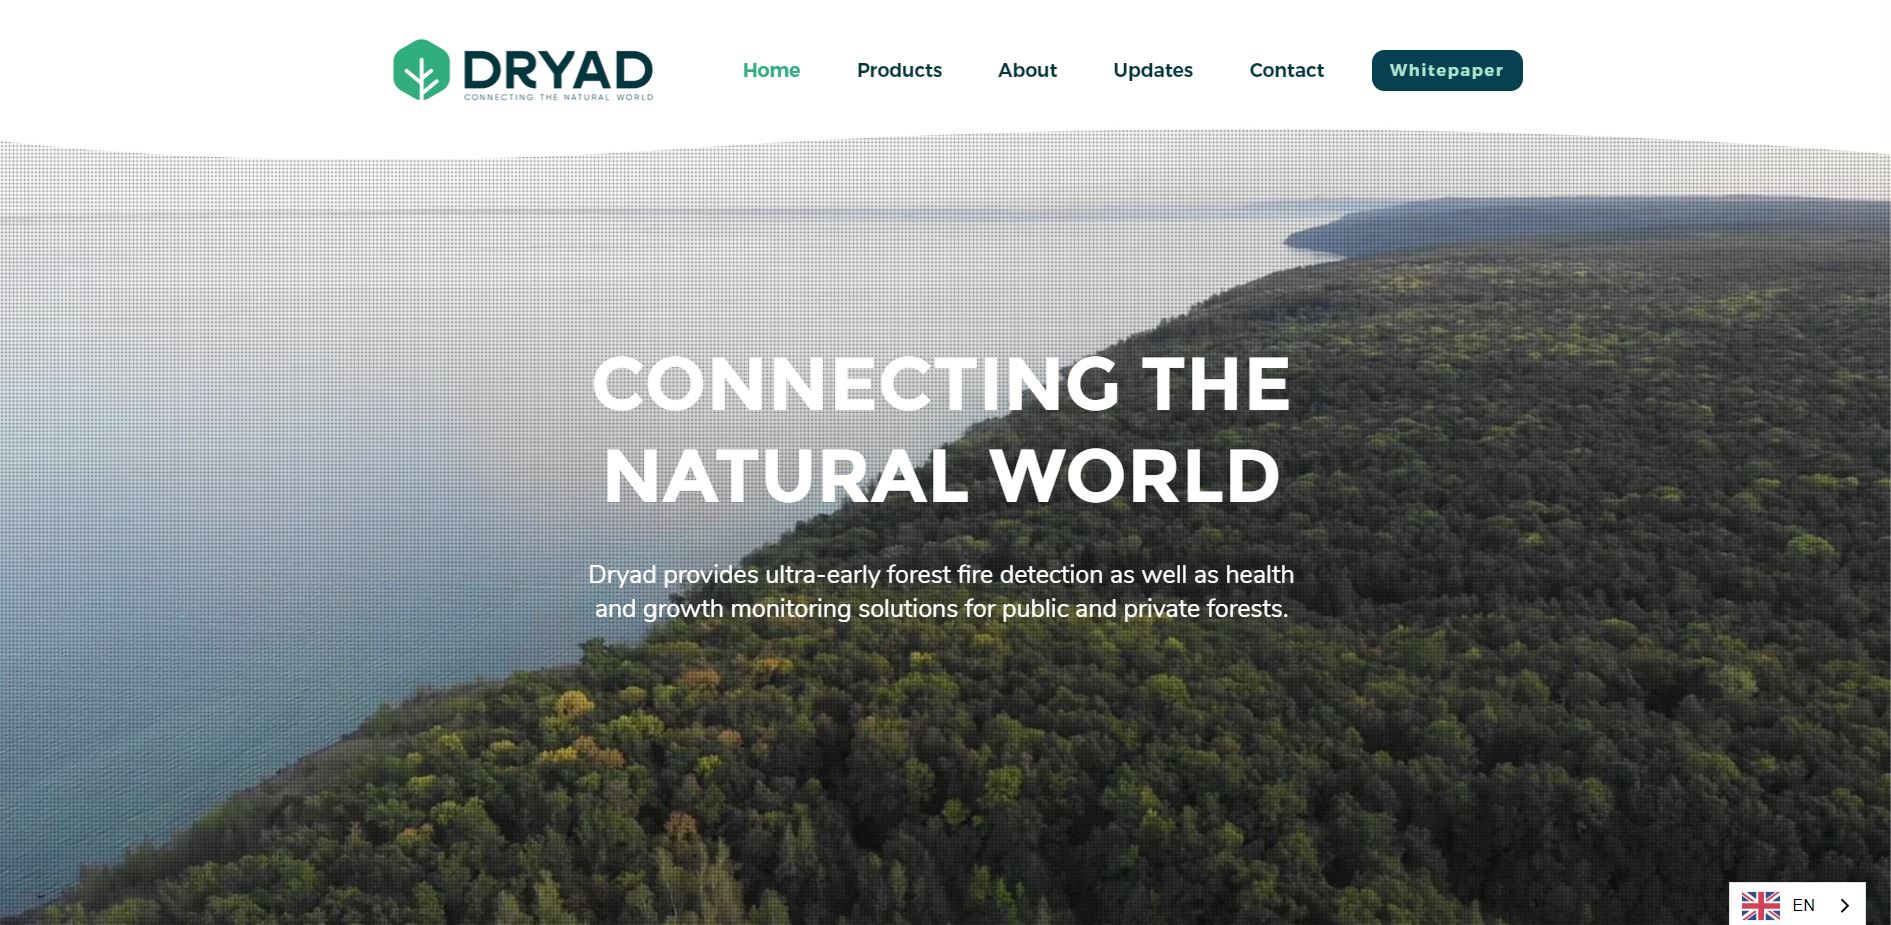 Dryad Networks focus is on ultra-early forest fire detection and health monitoring solutions for public and private forests